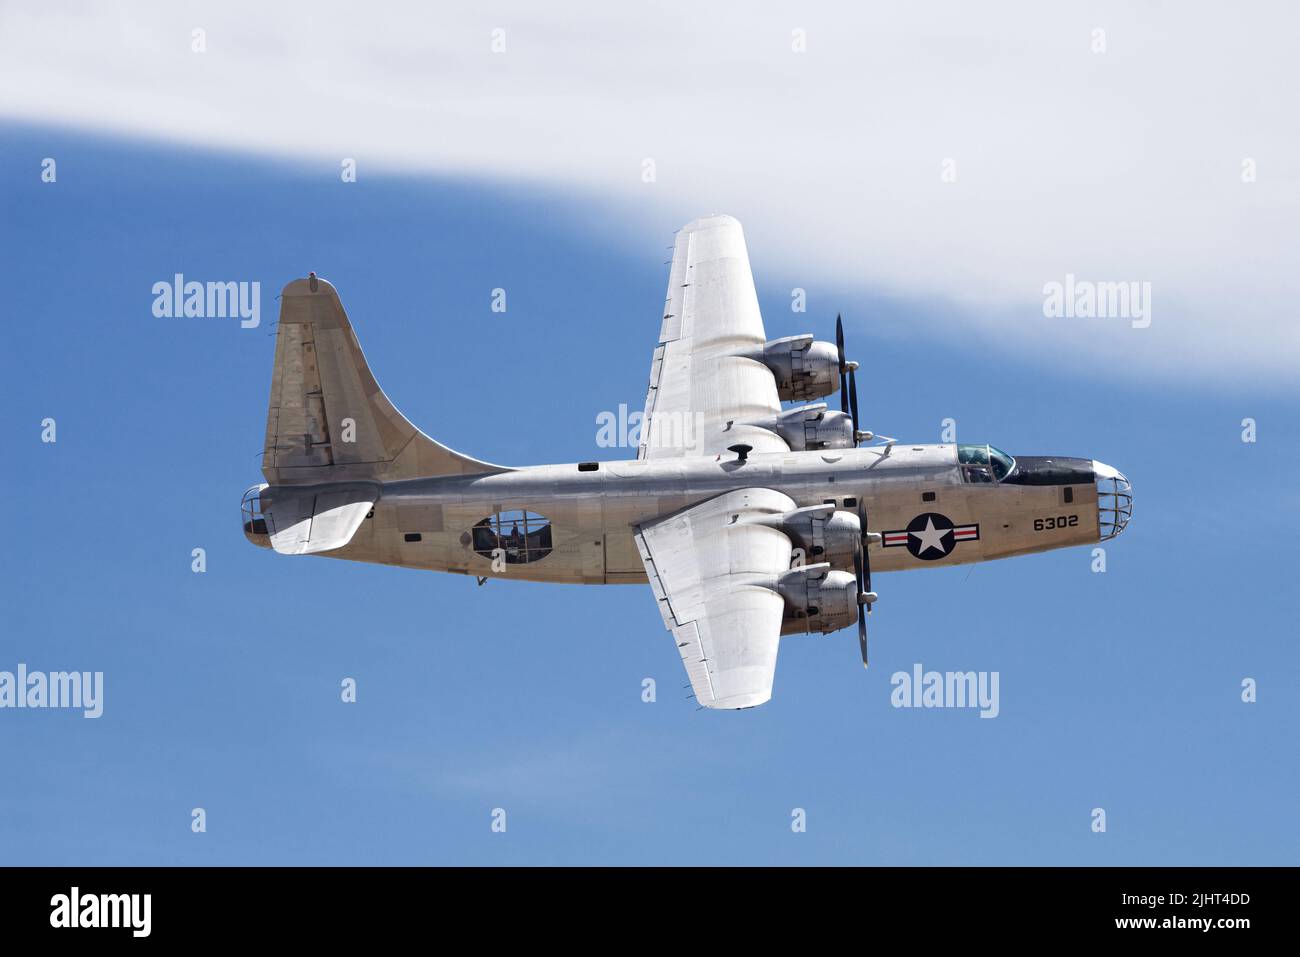 Consolidated PB4Y-2 Privateer with registration N2871G shown flying over Chino Airport in California, USA on May 6, 2018. Stock Photo